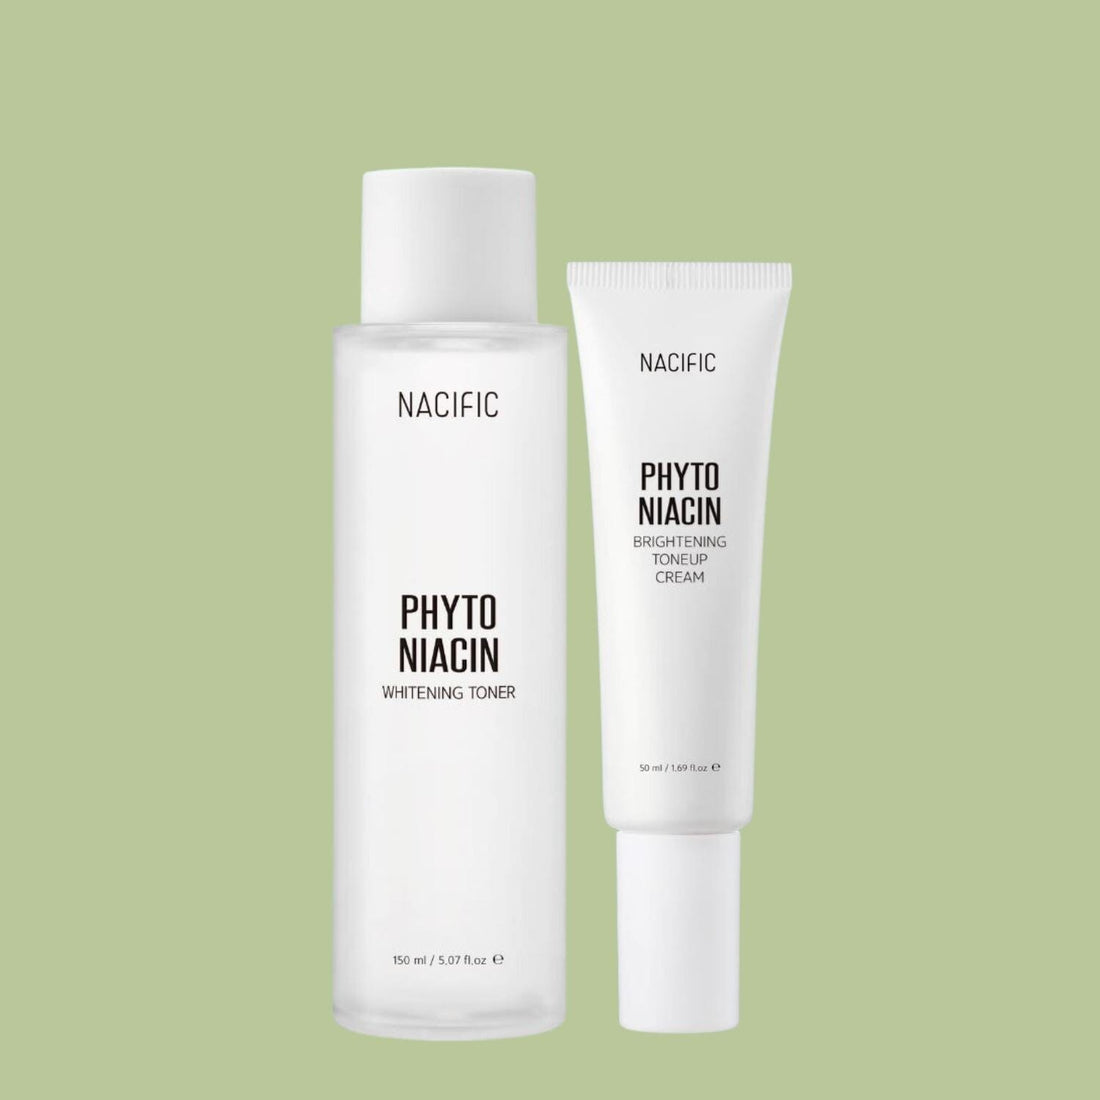 Nacific Phyto Niacin Brightening Line Toner + Tone-Up Cream, at Orion Beauty. Nacific Official Sole Authorized Retailer in Sri Lanka!